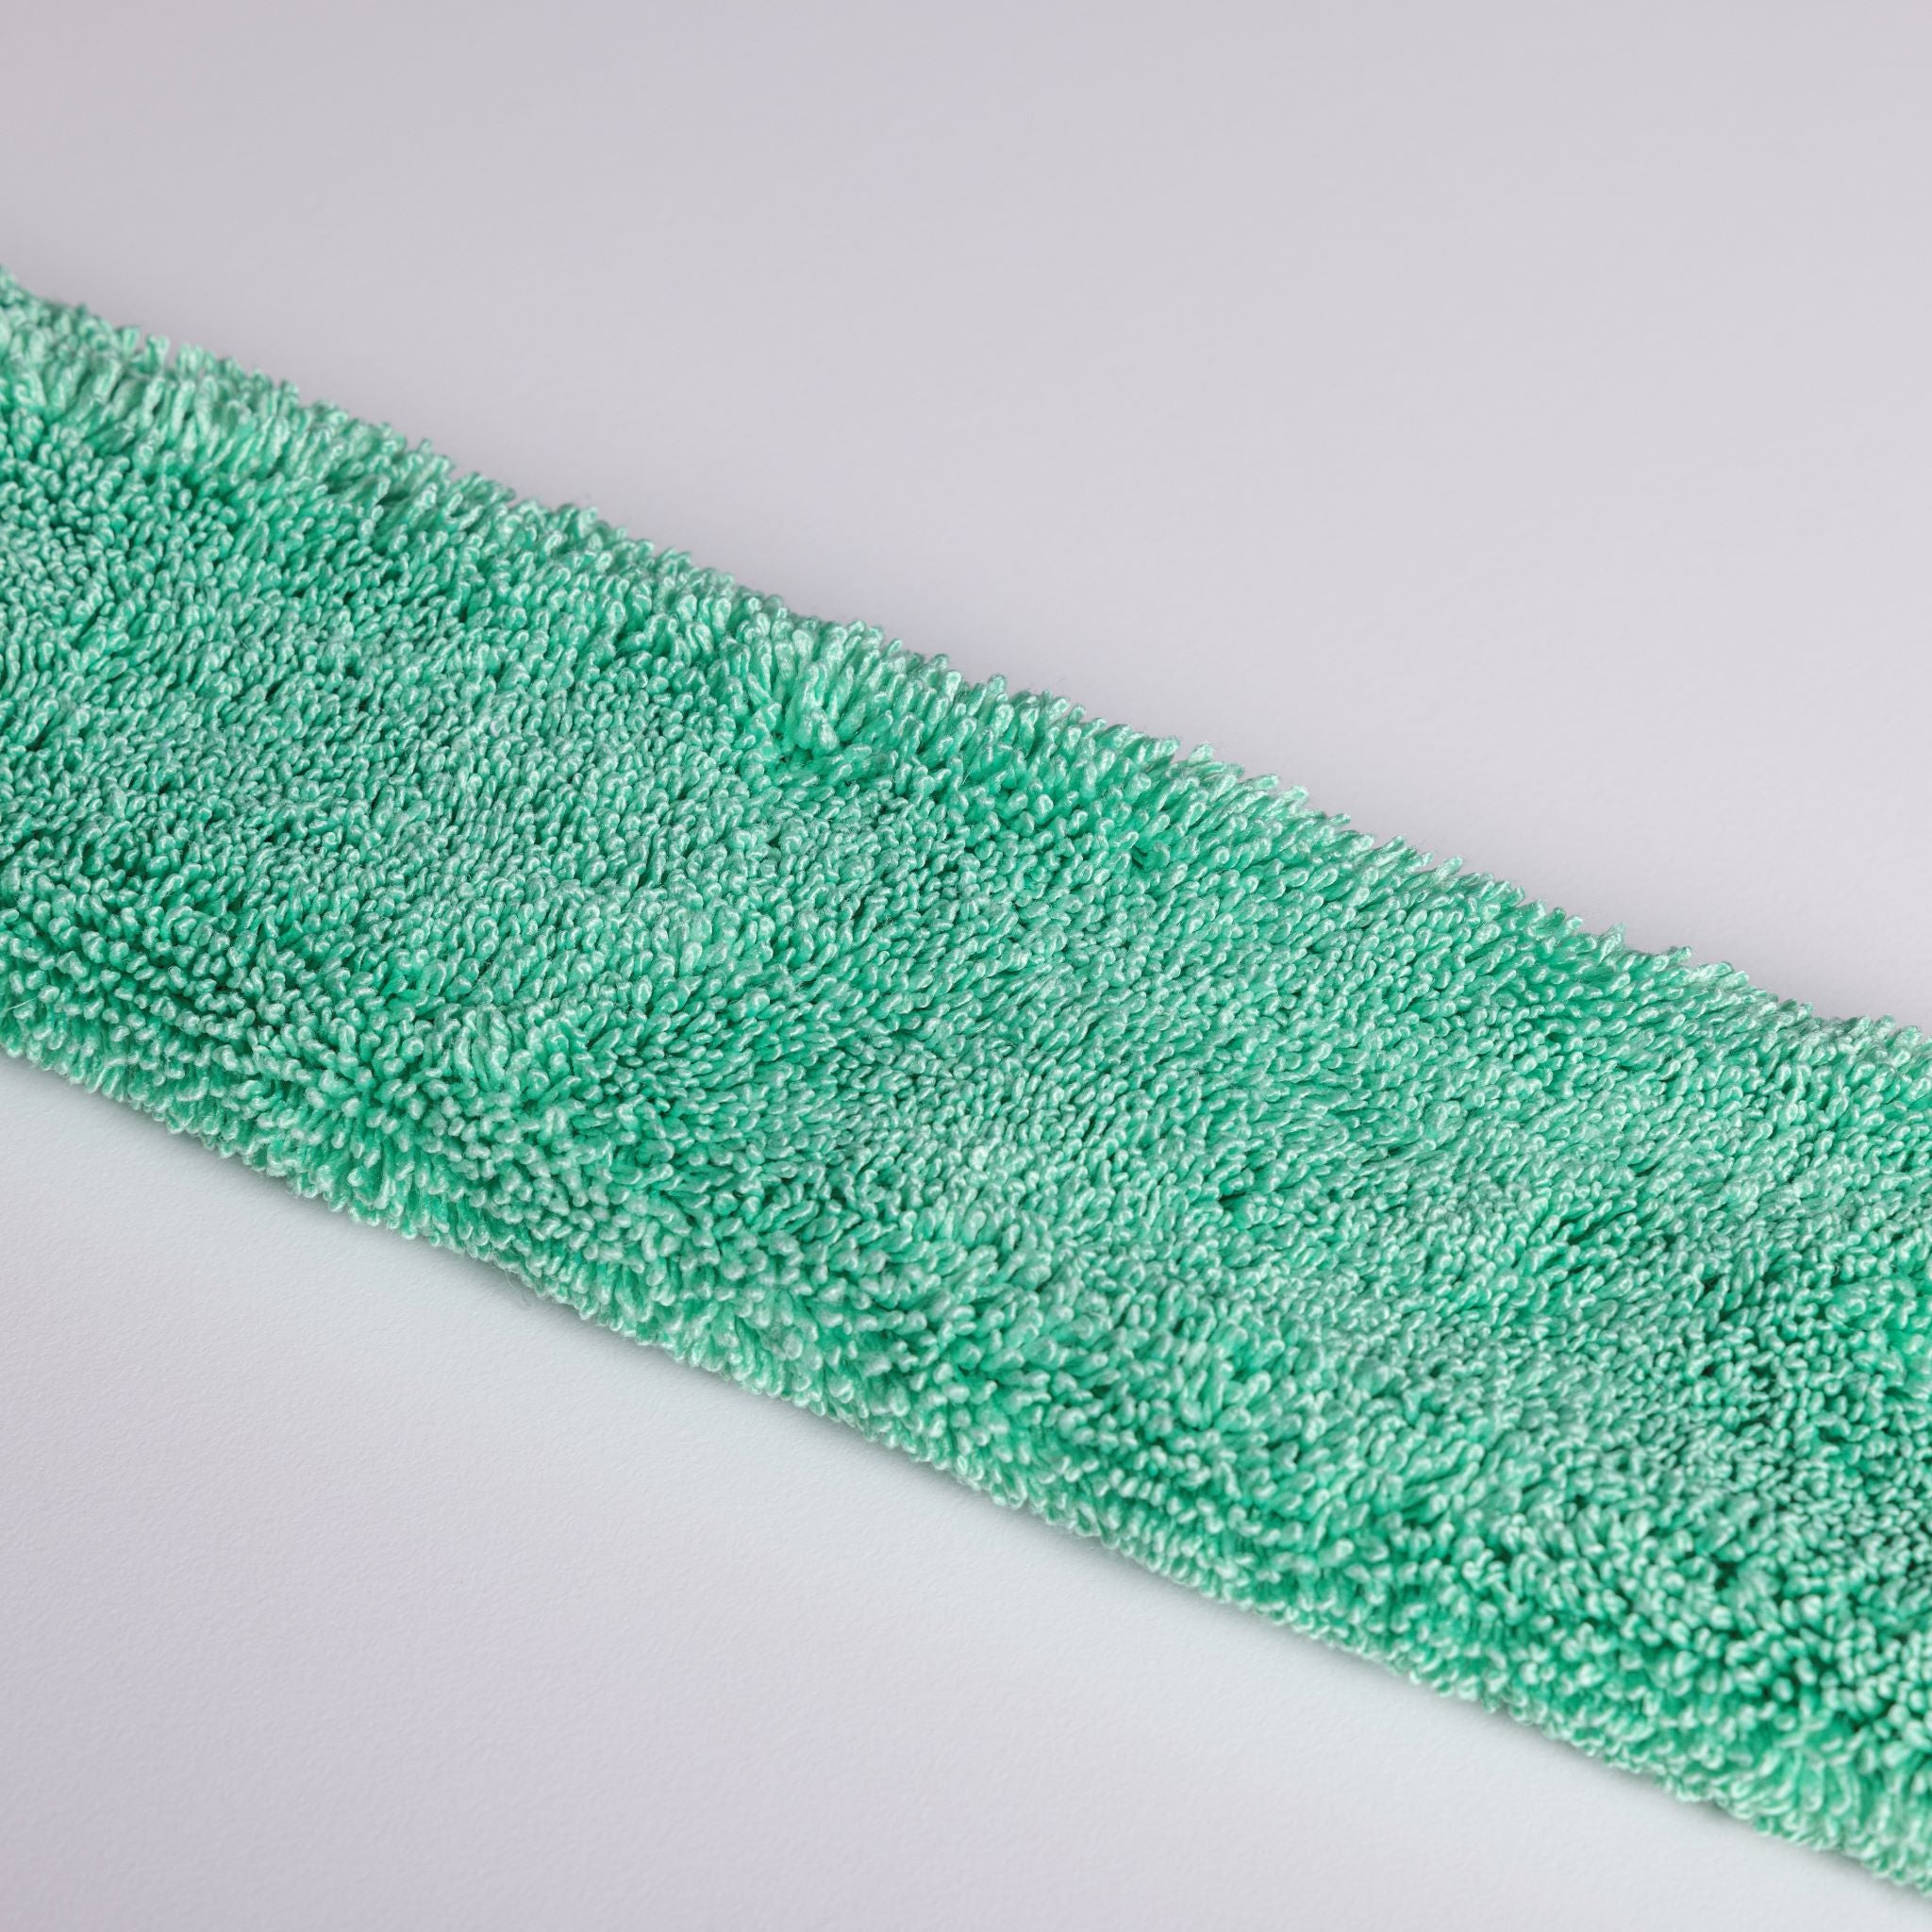 TRUST U-RAG Quick-Connect Flexible Dusting Wand with Microfiber Sleeve - Green